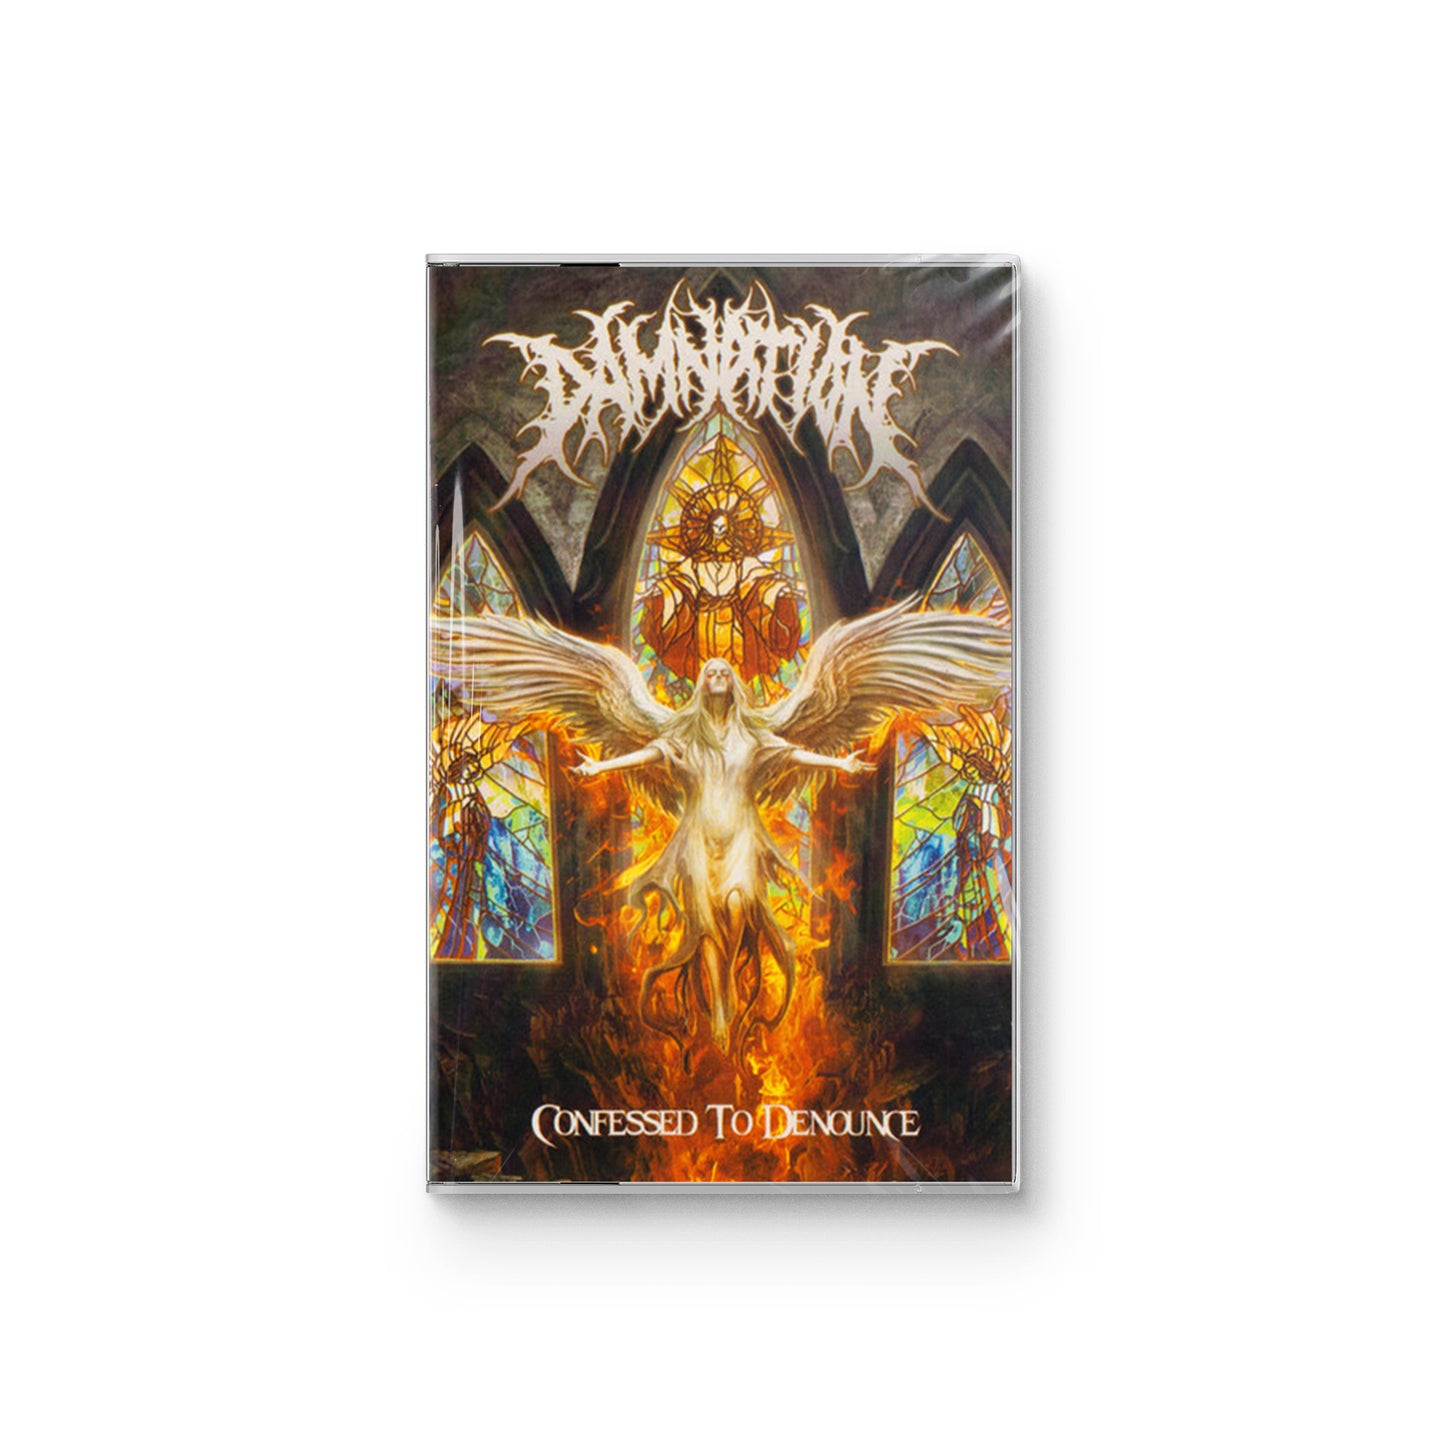 Damnation "Confessed To Denounce" CASSETTE